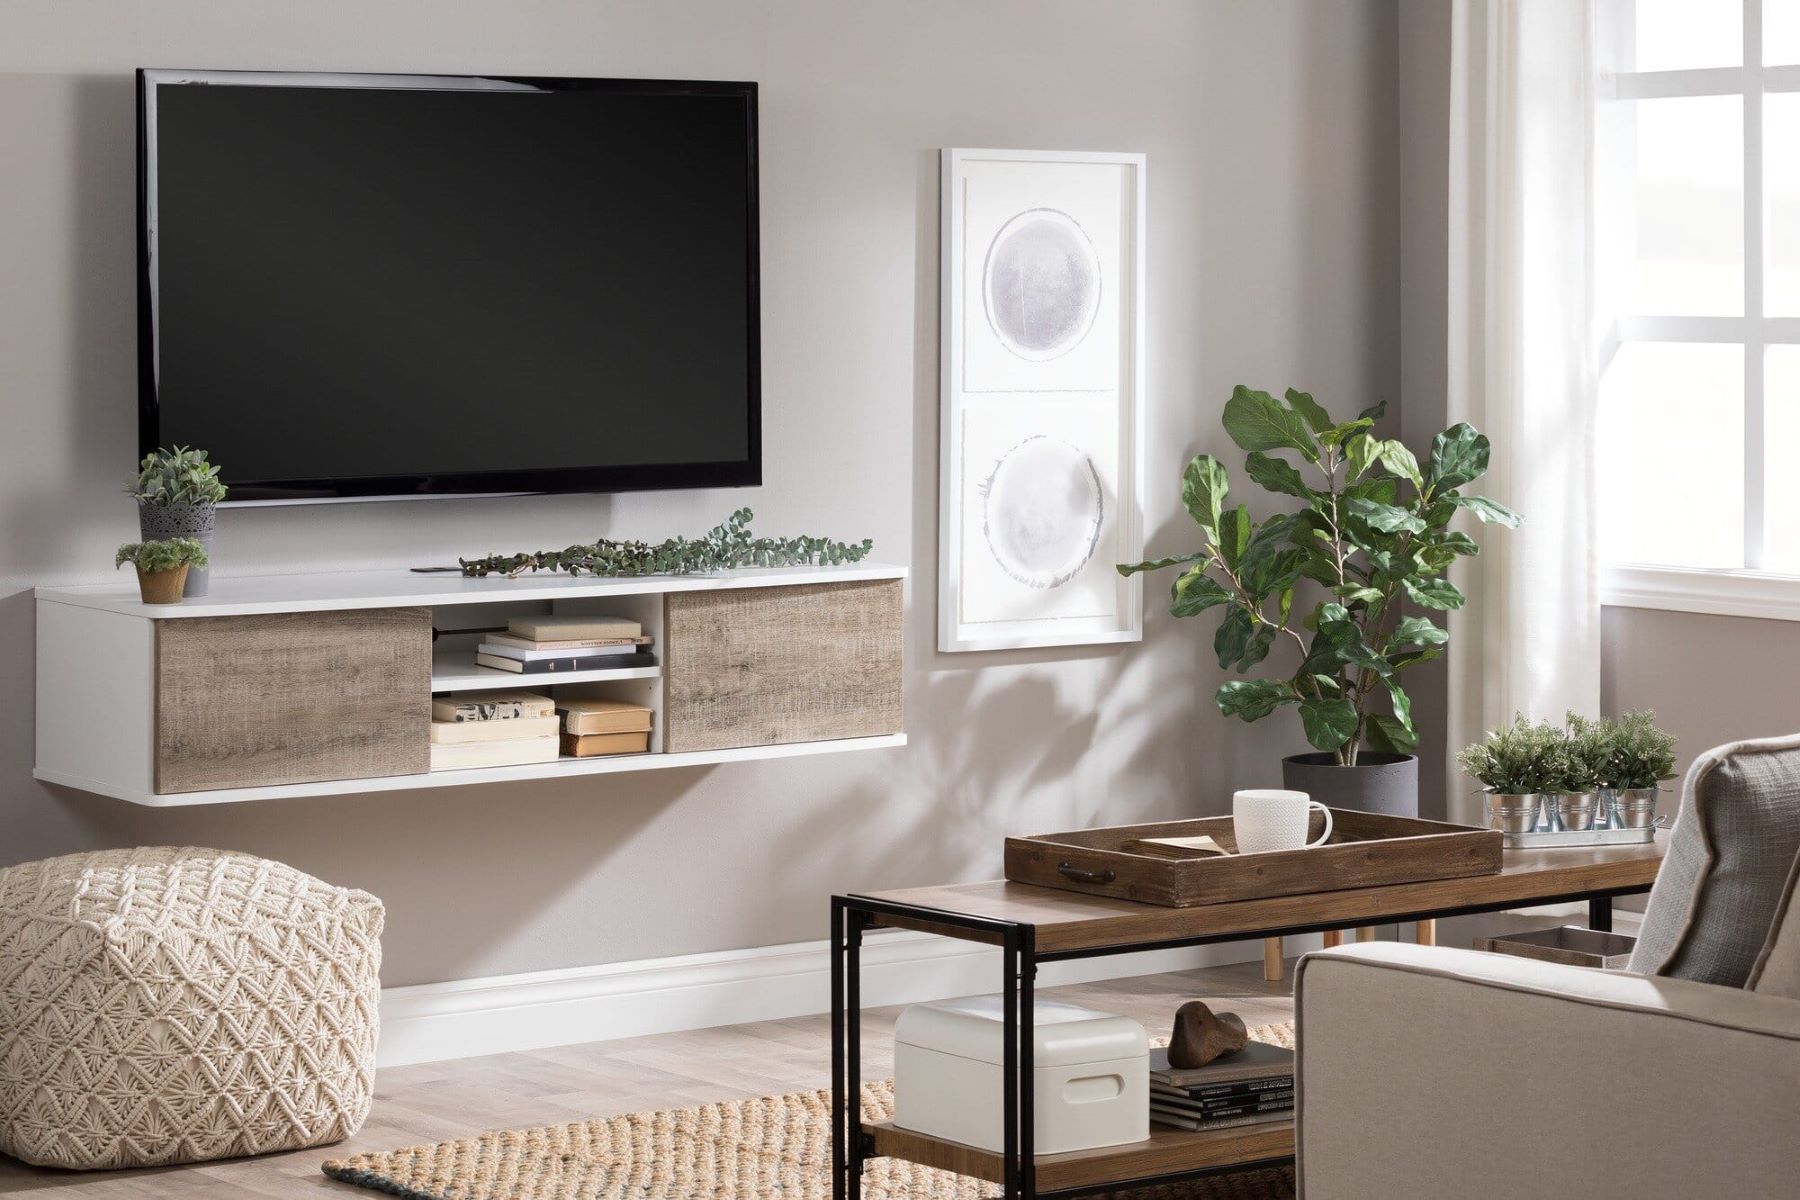 How To Mount A TV Stand On The Wall